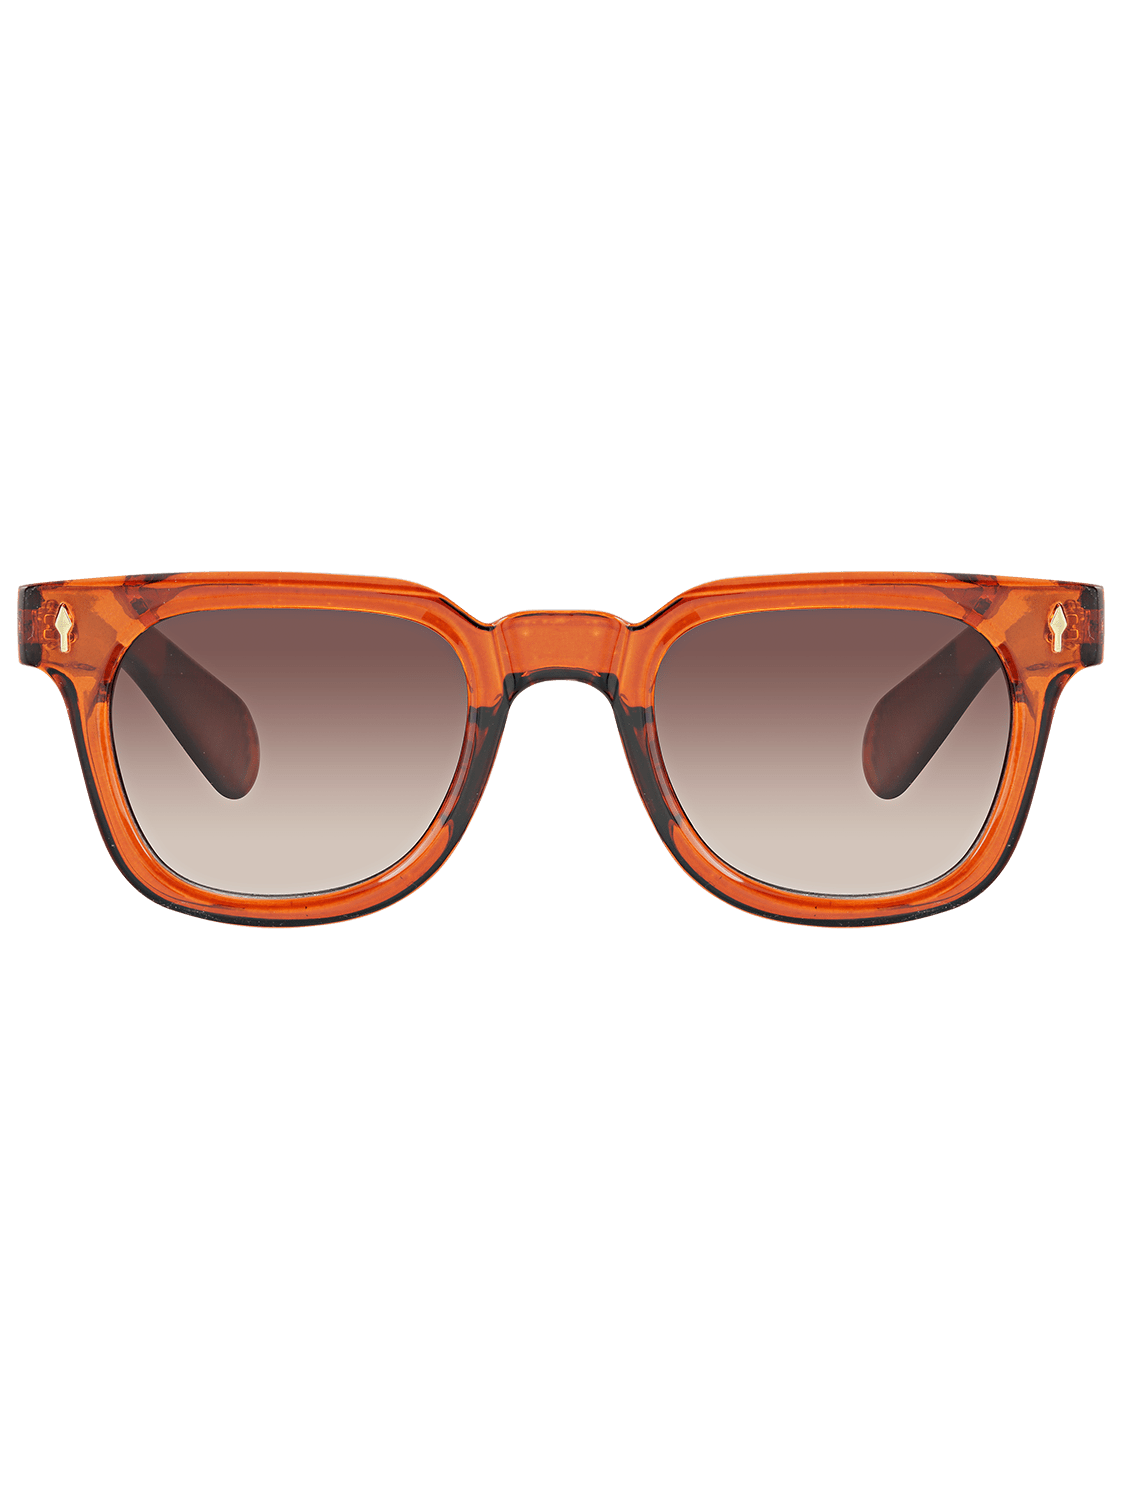 Front view of new Bixby and Co men’s sunglasses